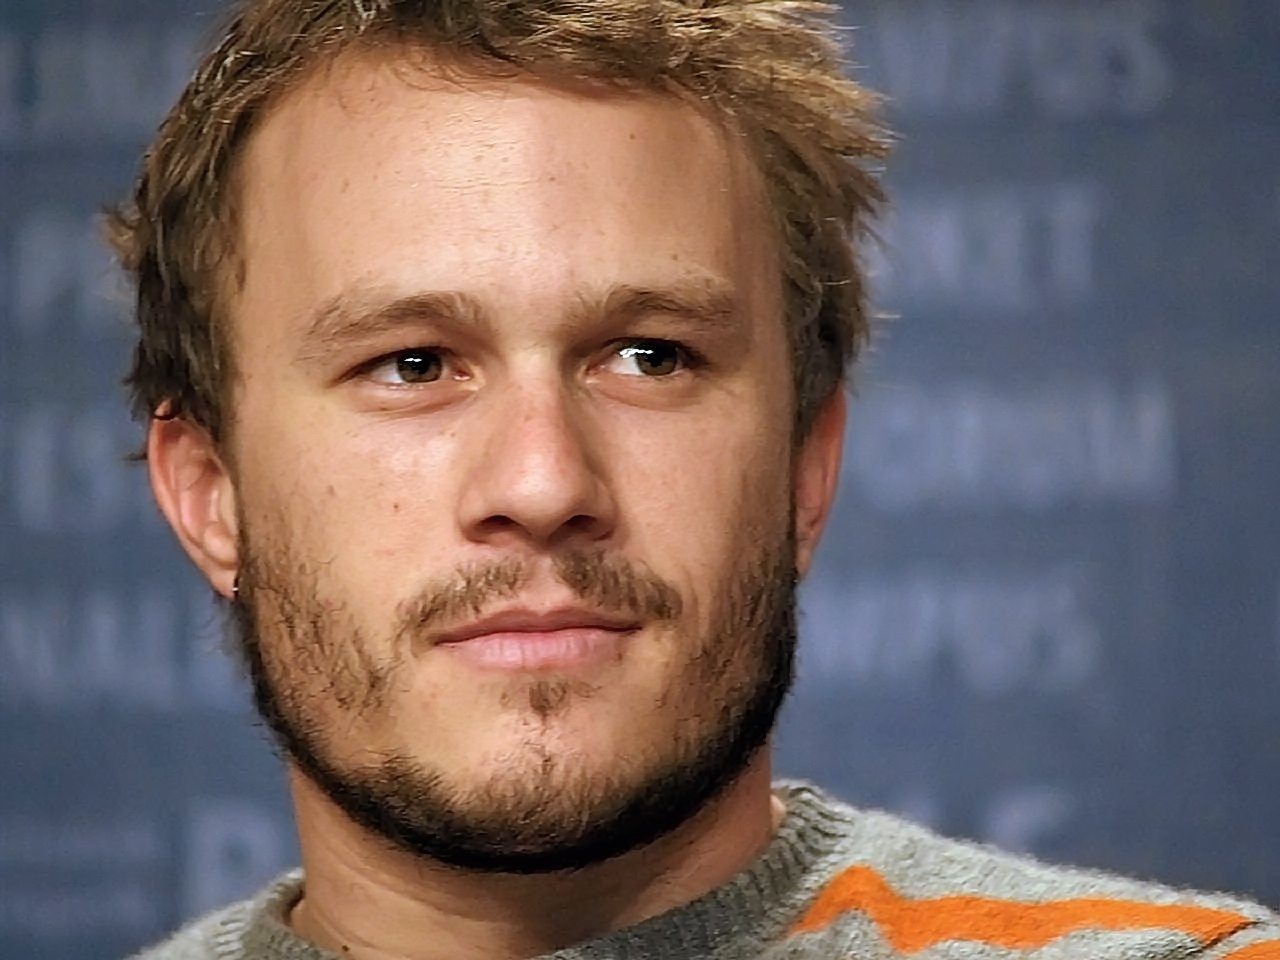 Happy birthday, Heath Ledger! He would have been 39 today.

Gone but not forgotten (1979-2008) 